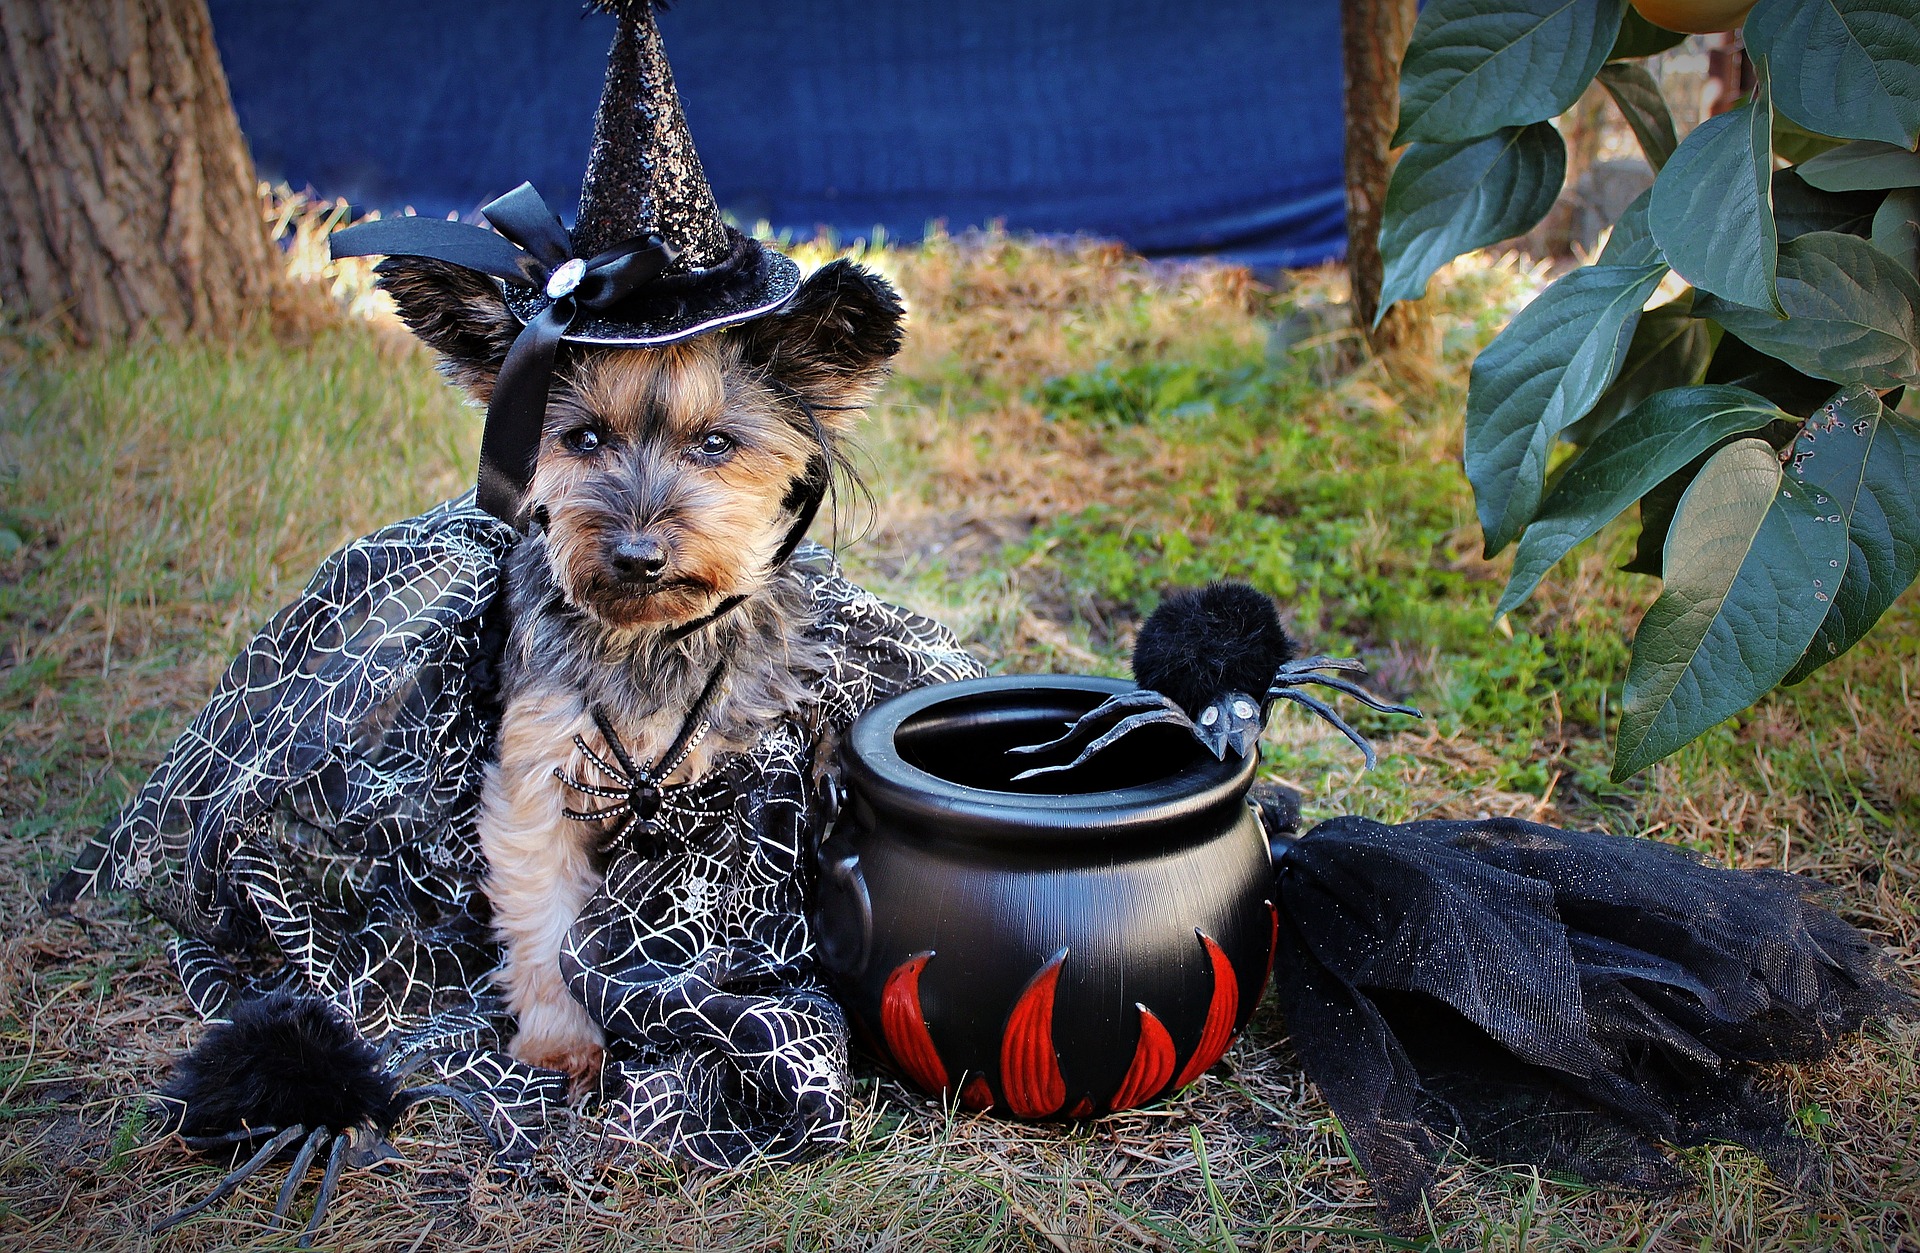 dog dressed in witch costume with cauldron.